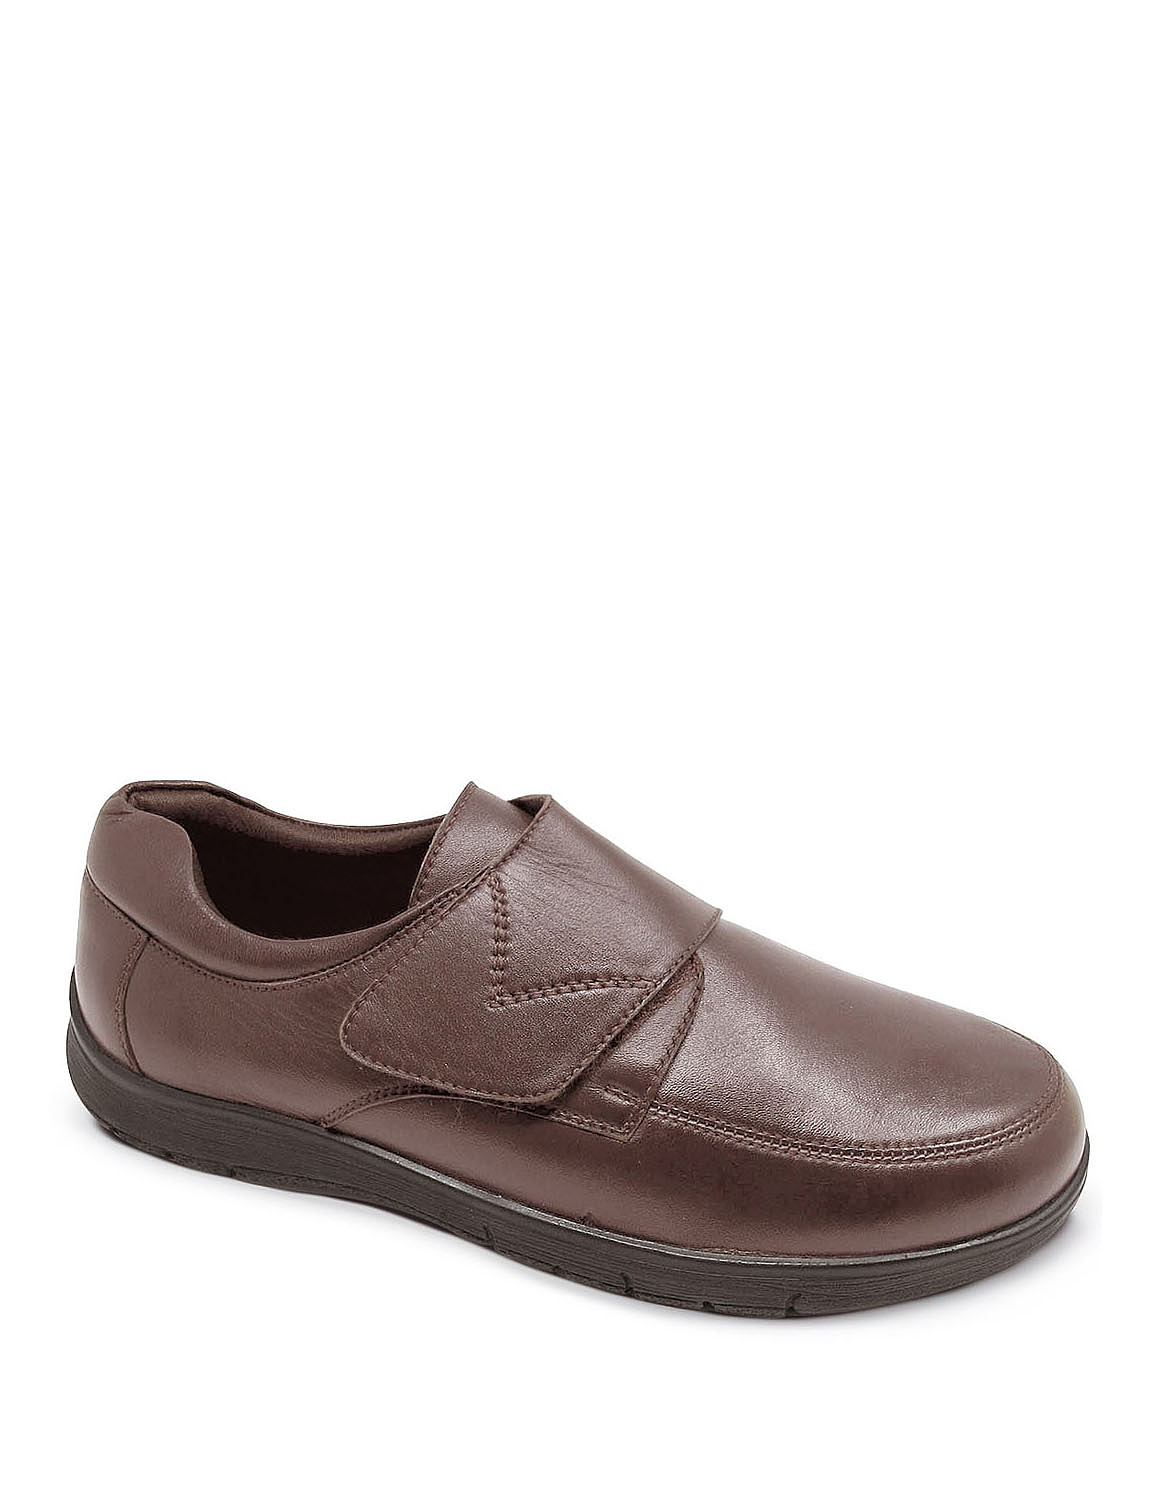 Leather Touch Fasten Wide Fit Shoe | Chums